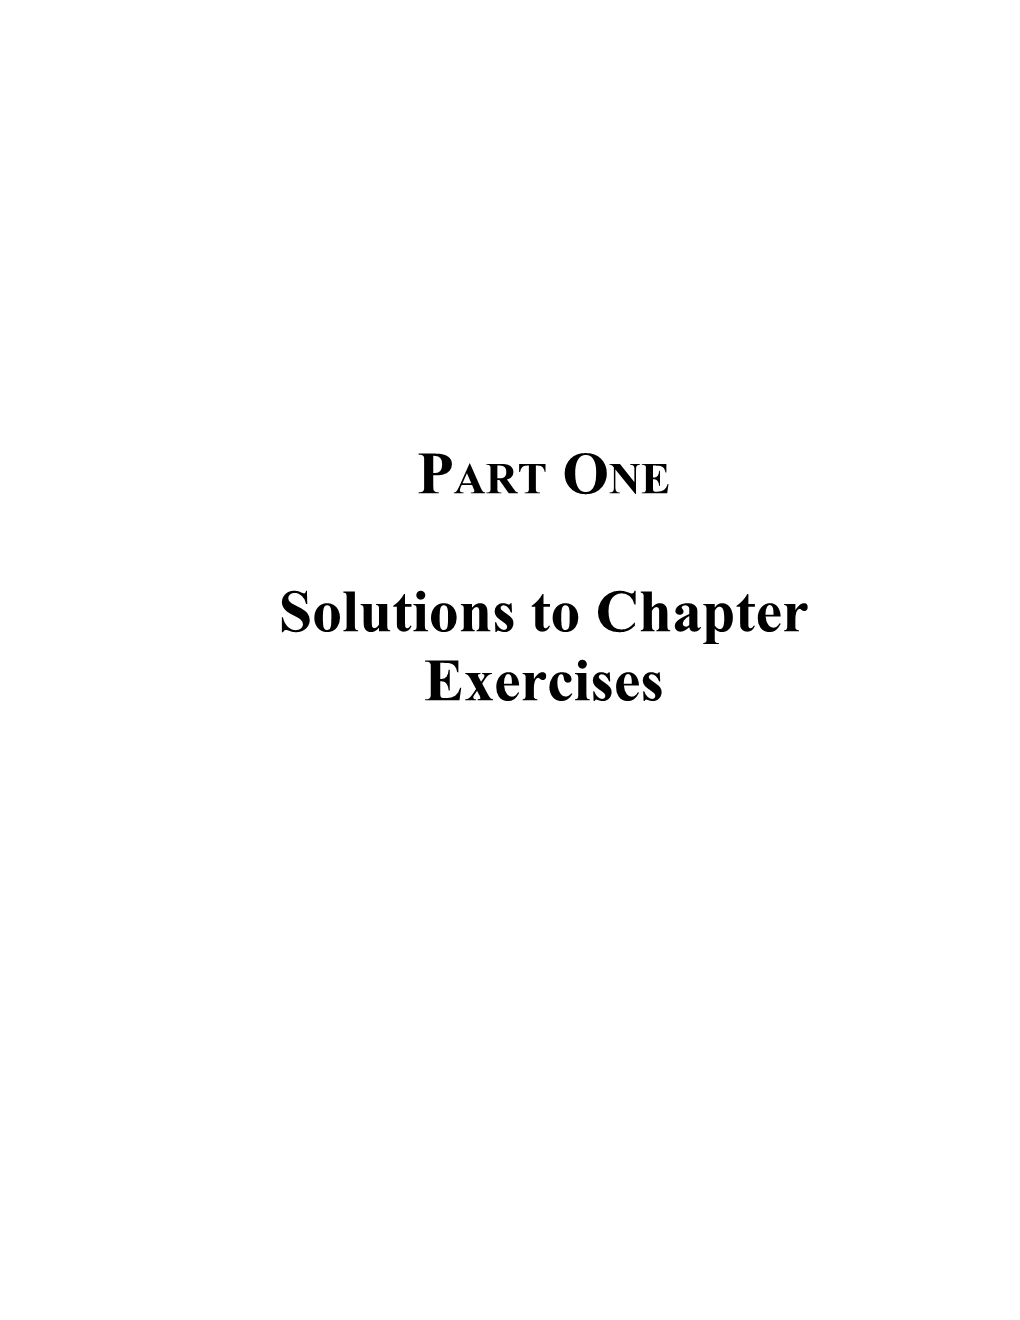 Part One Solutions to Chapter Exercises